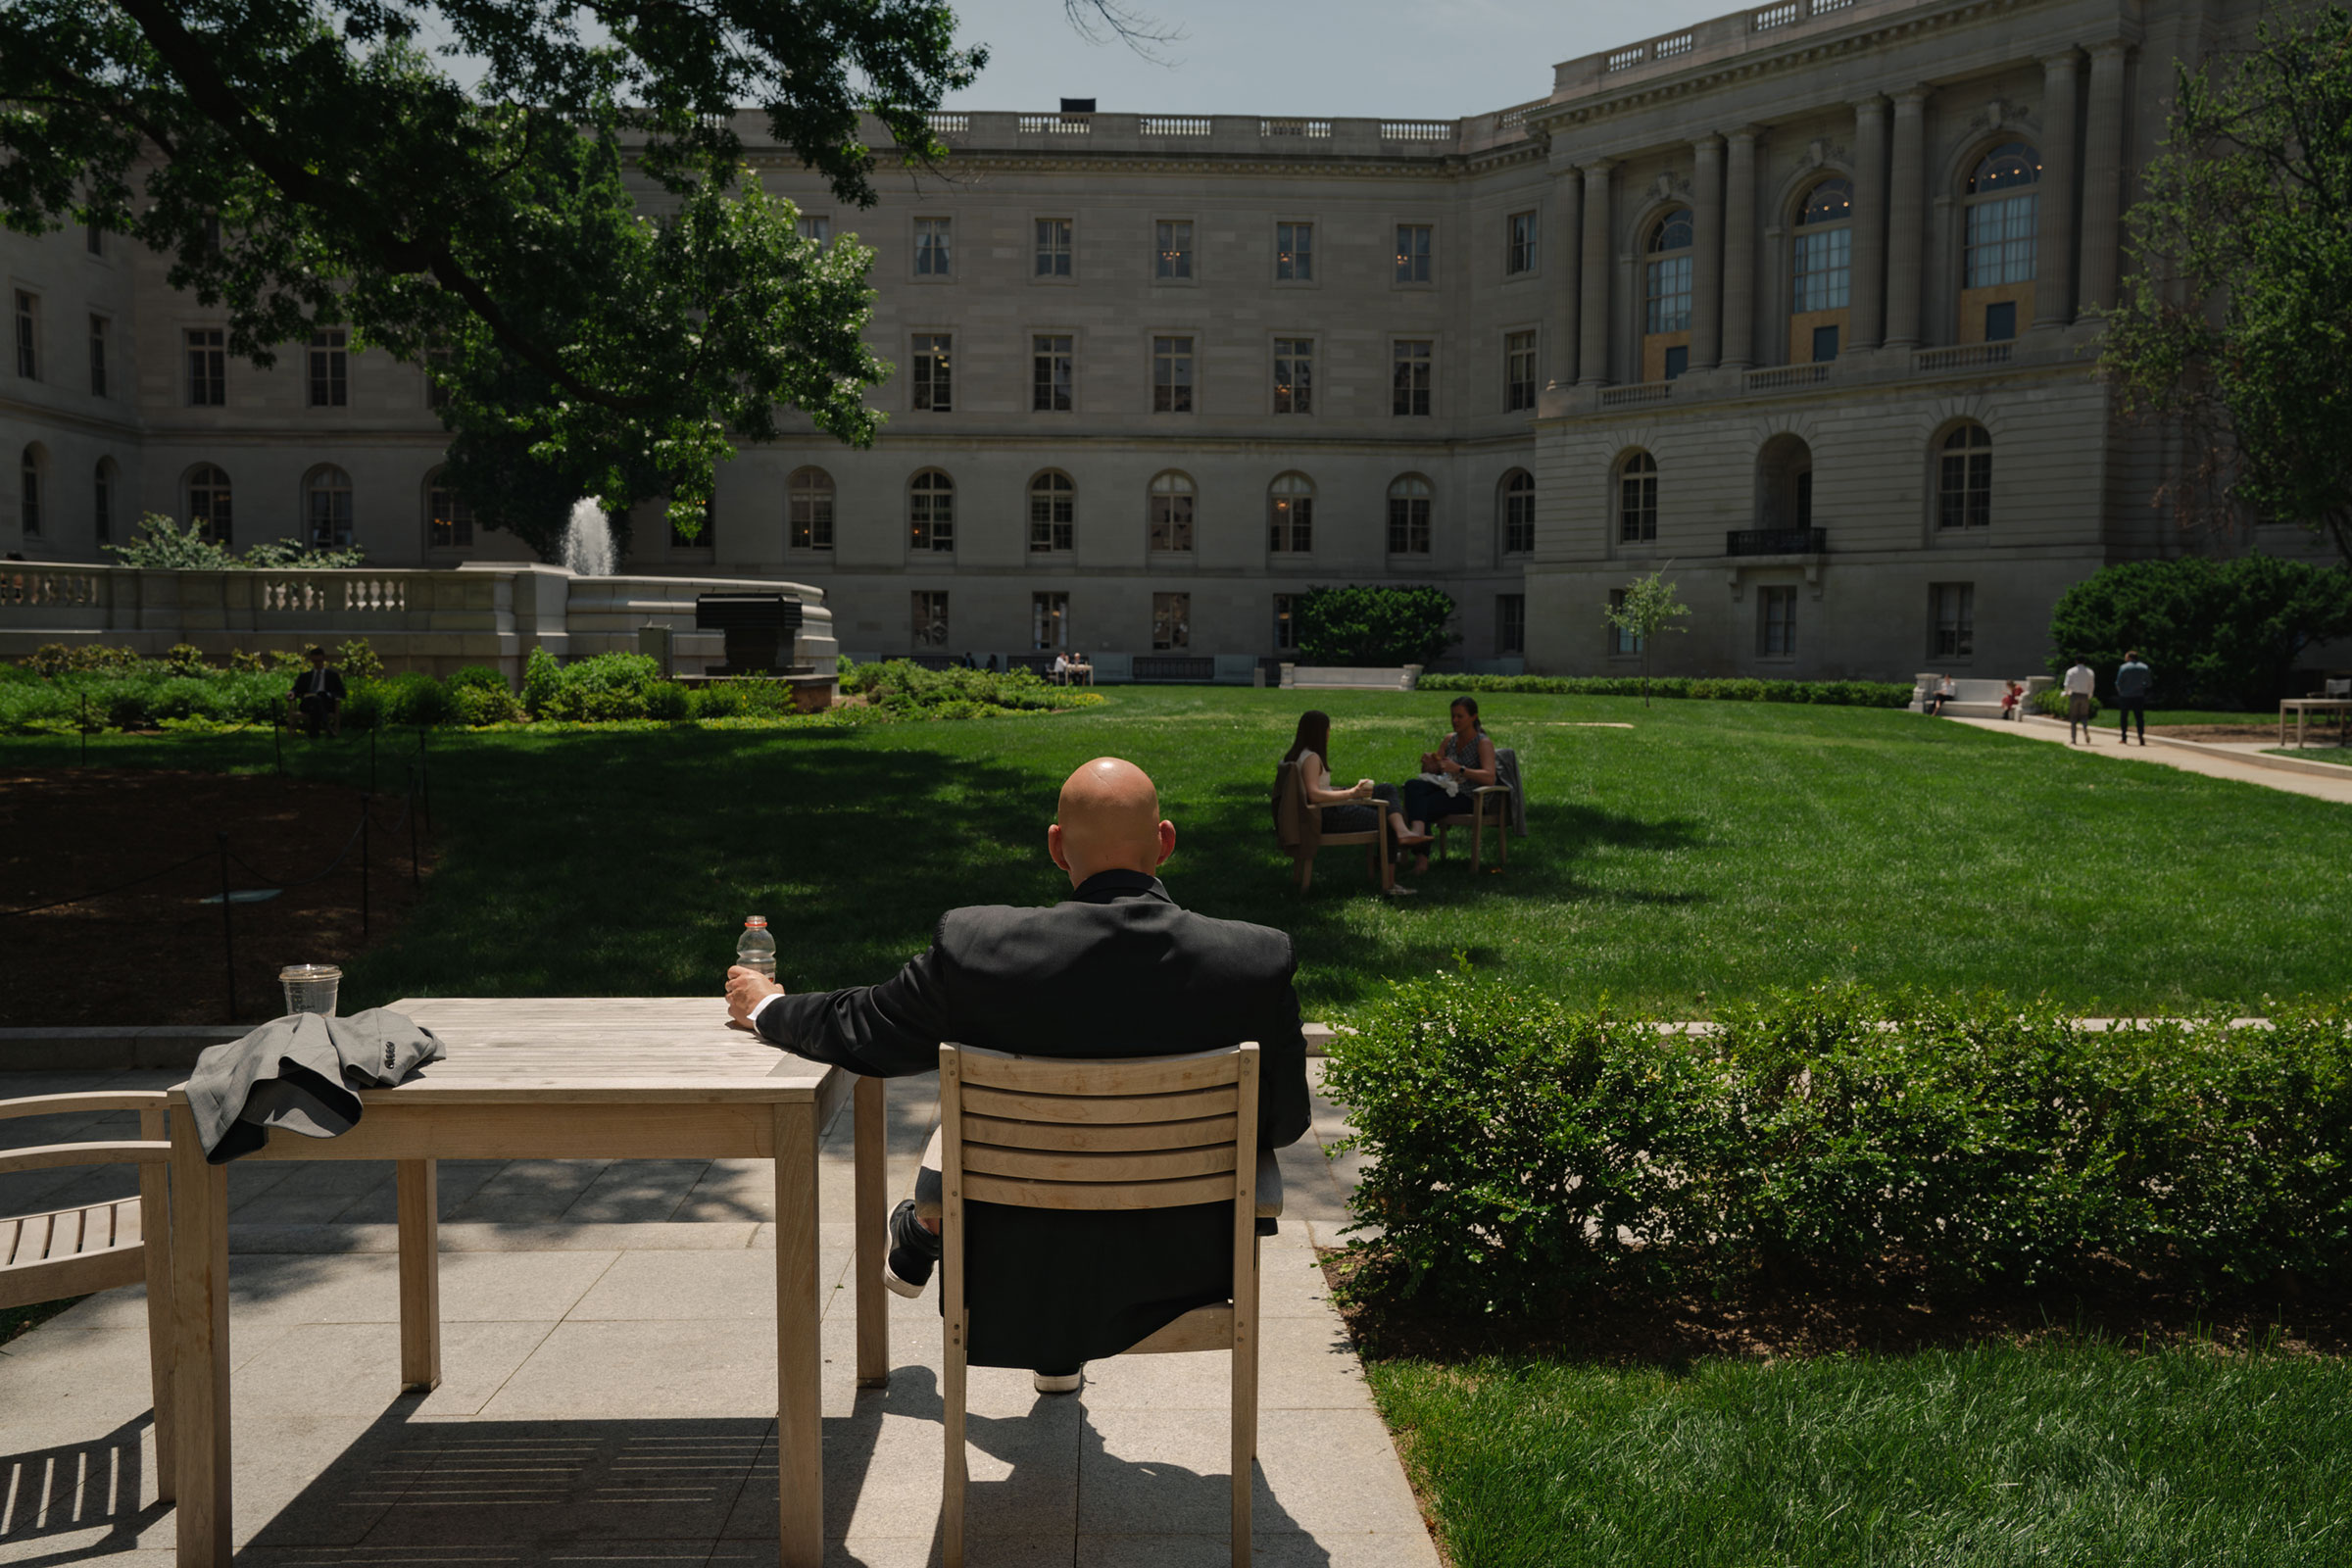 Senator John Fetterman sits in a chair outside in a courtyard at capitol hill with his back to the camera, he is holding a bottle of water resting his arm on a table and looking out into the courtyard